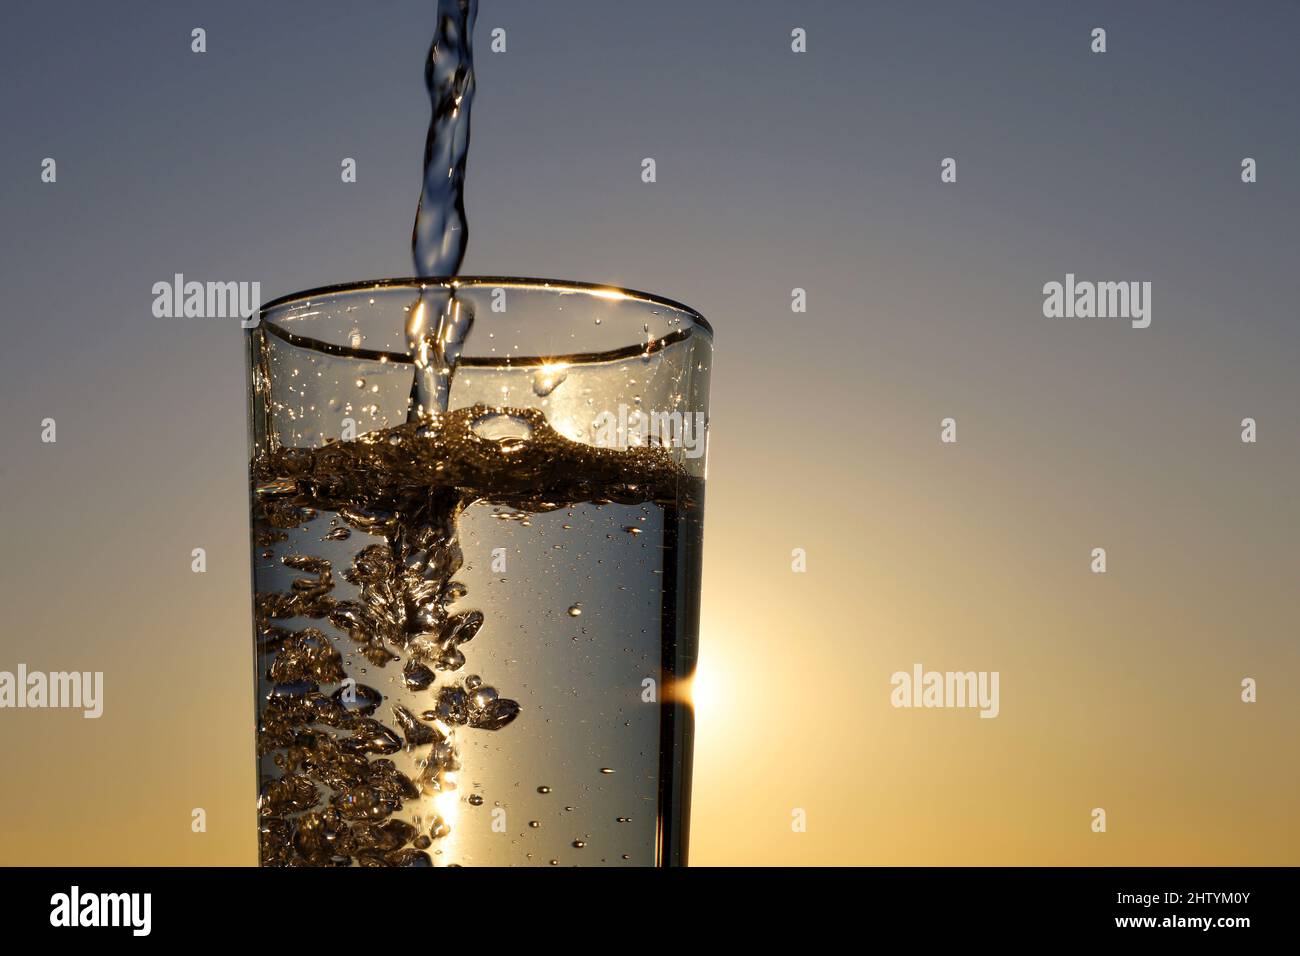 https://c8.alamy.com/comp/2HTYM0Y/clean-water-pouring-into-drinking-glass-on-sunset-sky-background-concept-of-health-and-freshness-thirst-water-purification-2HTYM0Y.jpg